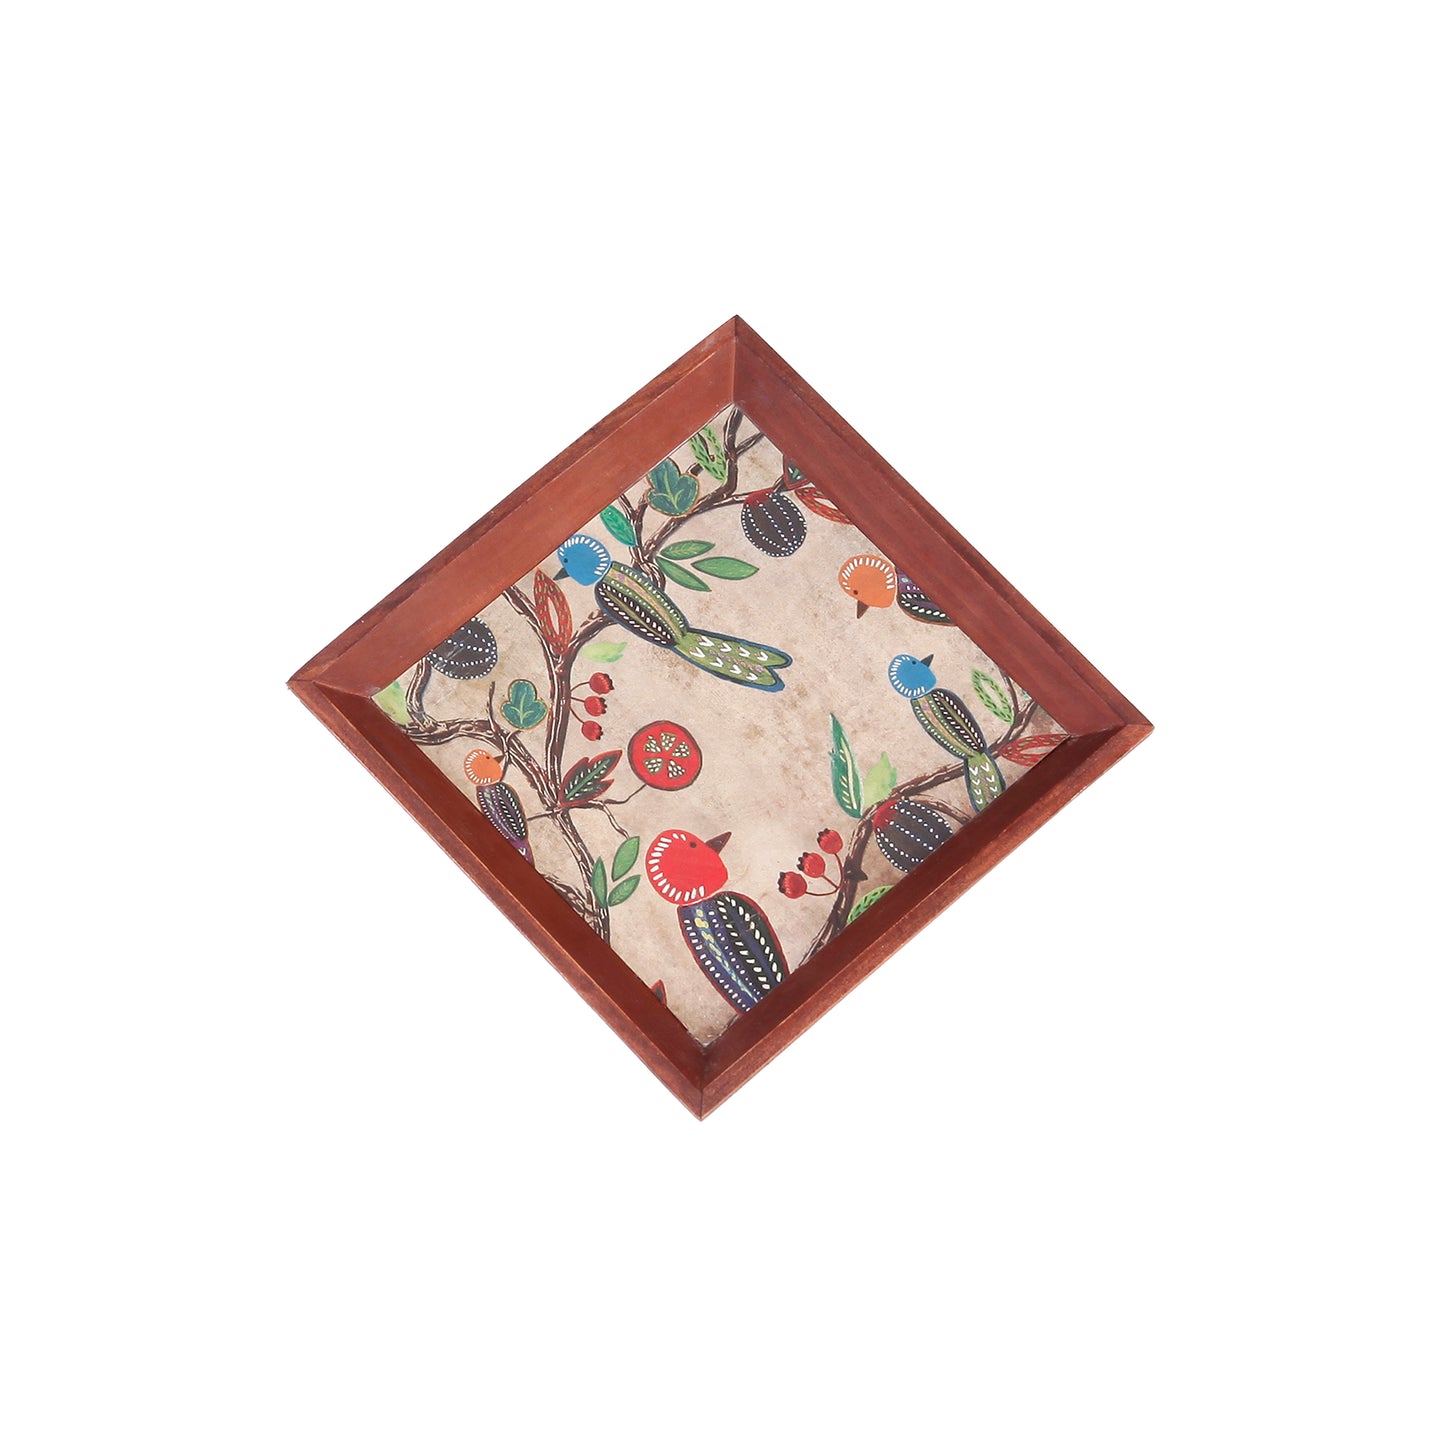 A Tiny Mistake Vintage Birds Small Square Wooden Serving Tray, 18 x 18 x 2 cm